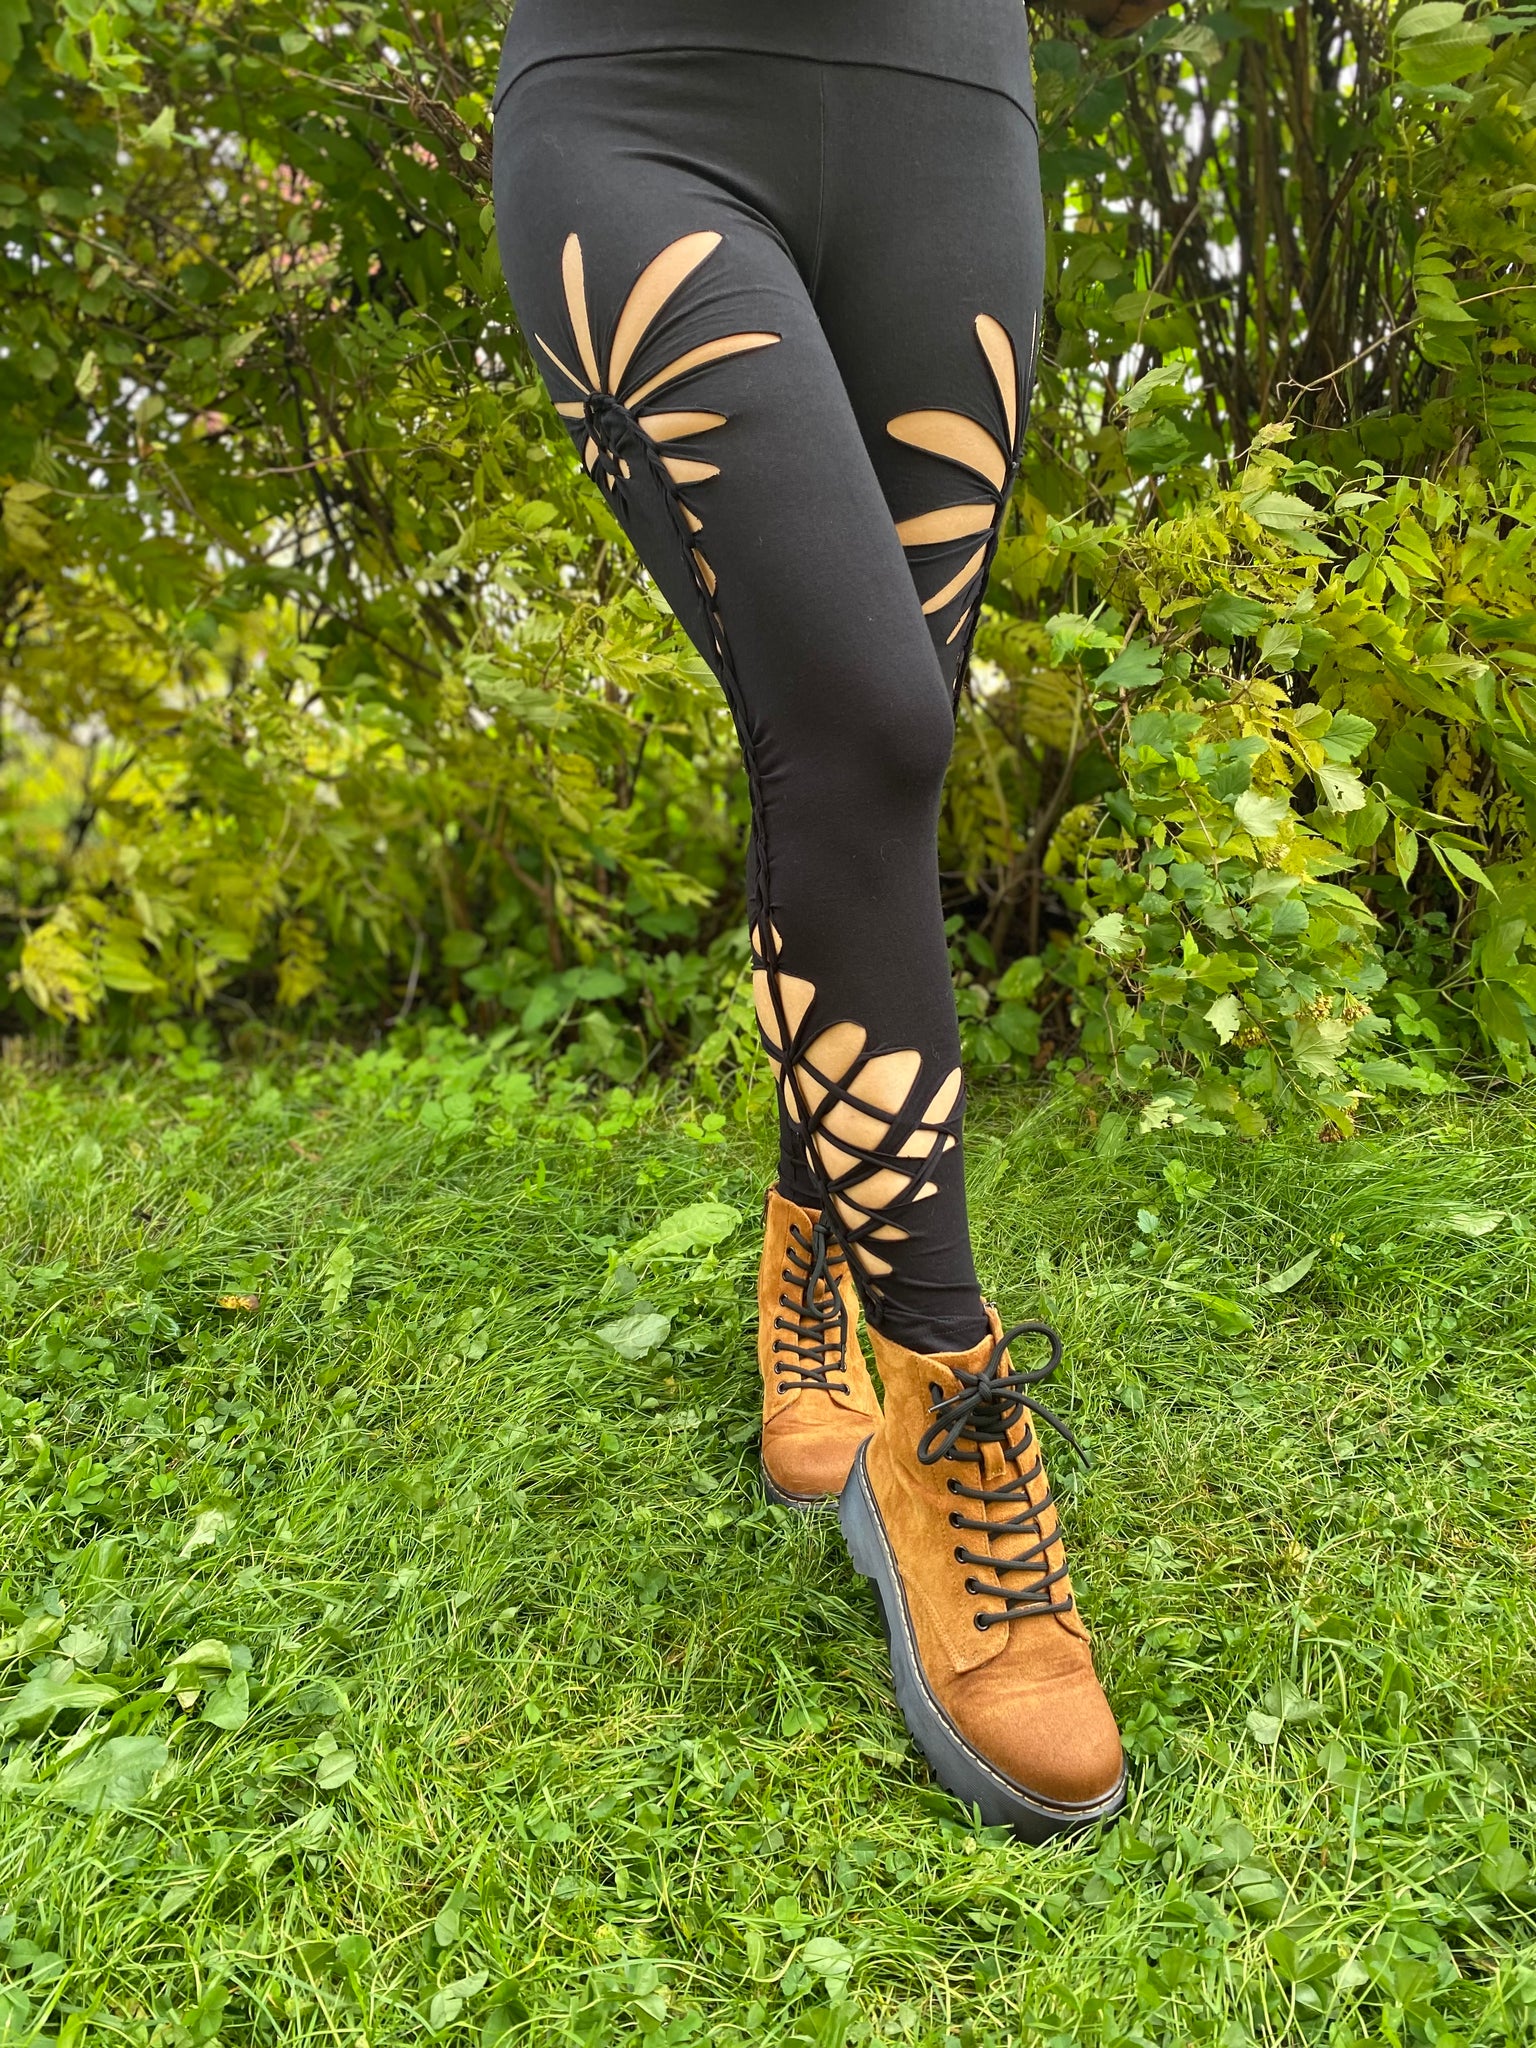 Diy Heart Patch Leggings · How To Make Leggings · Sewing on Cut Out + Keep